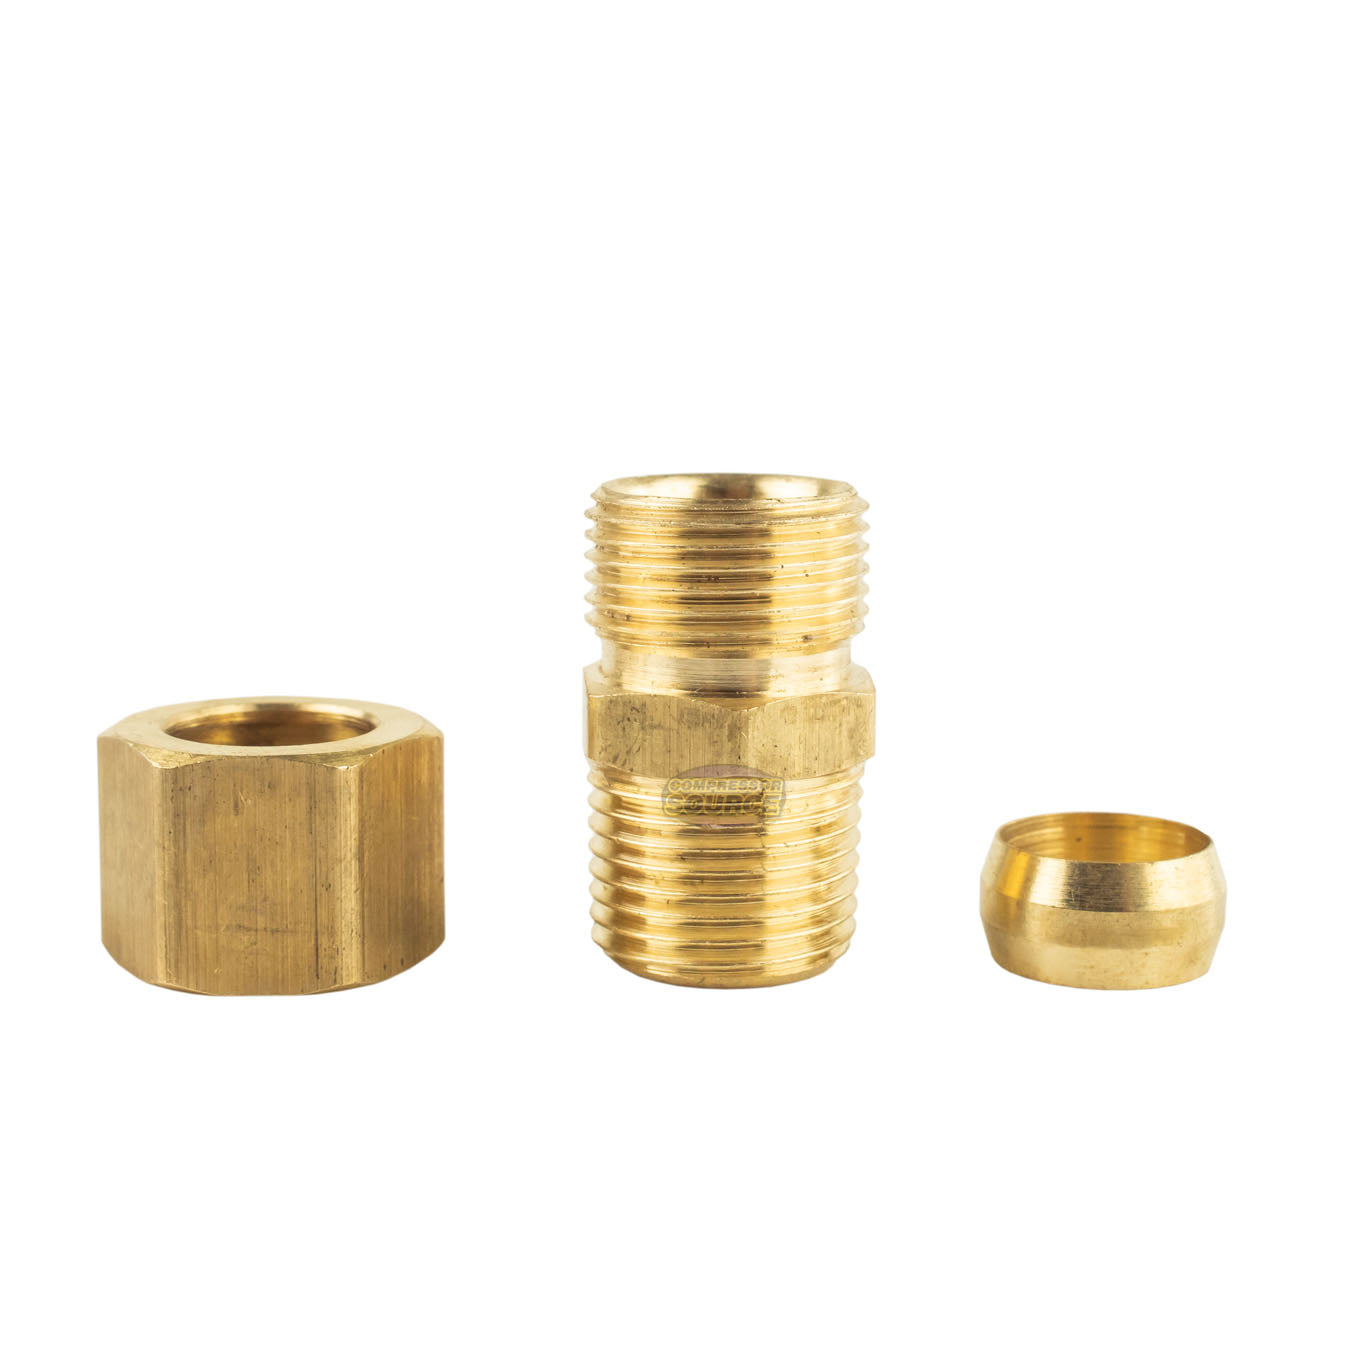 1/2" OD x 3/8" Male NPT Connector Brass Compression Fitting for 1/2" OD Tube